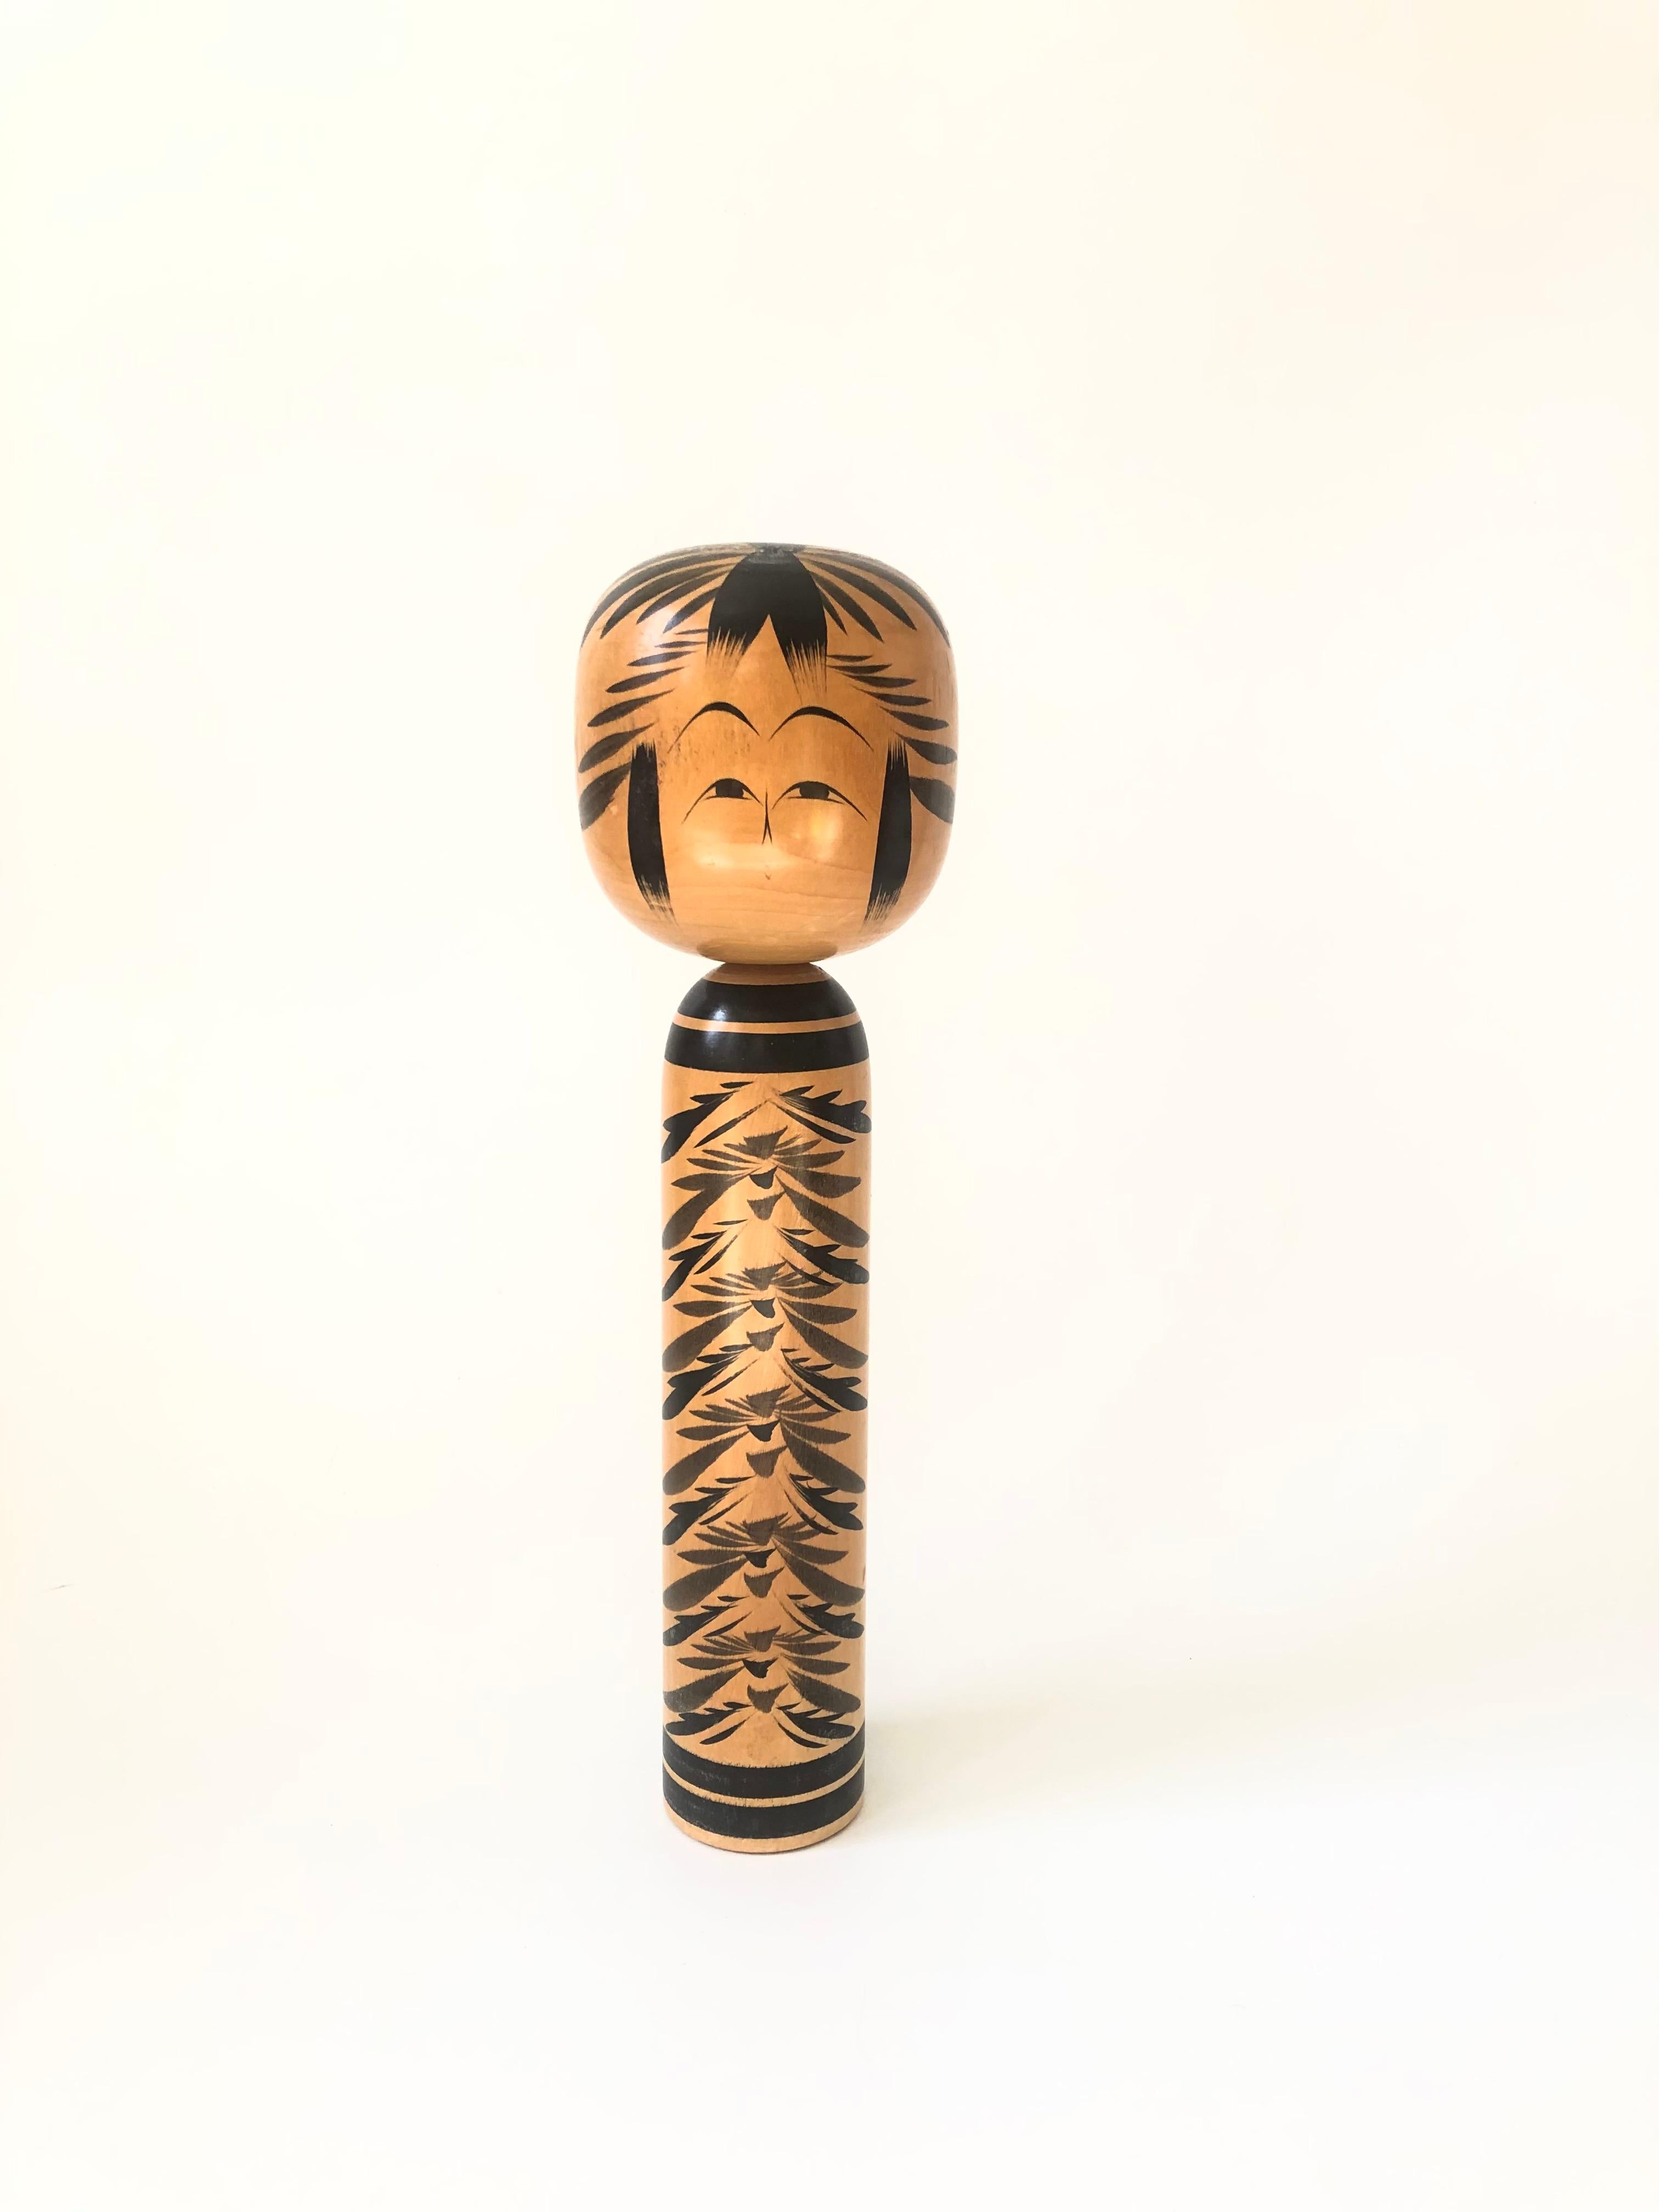 A tall vintage Japanese kokeshi doll. Made of wood with a lovely hand painted design.

